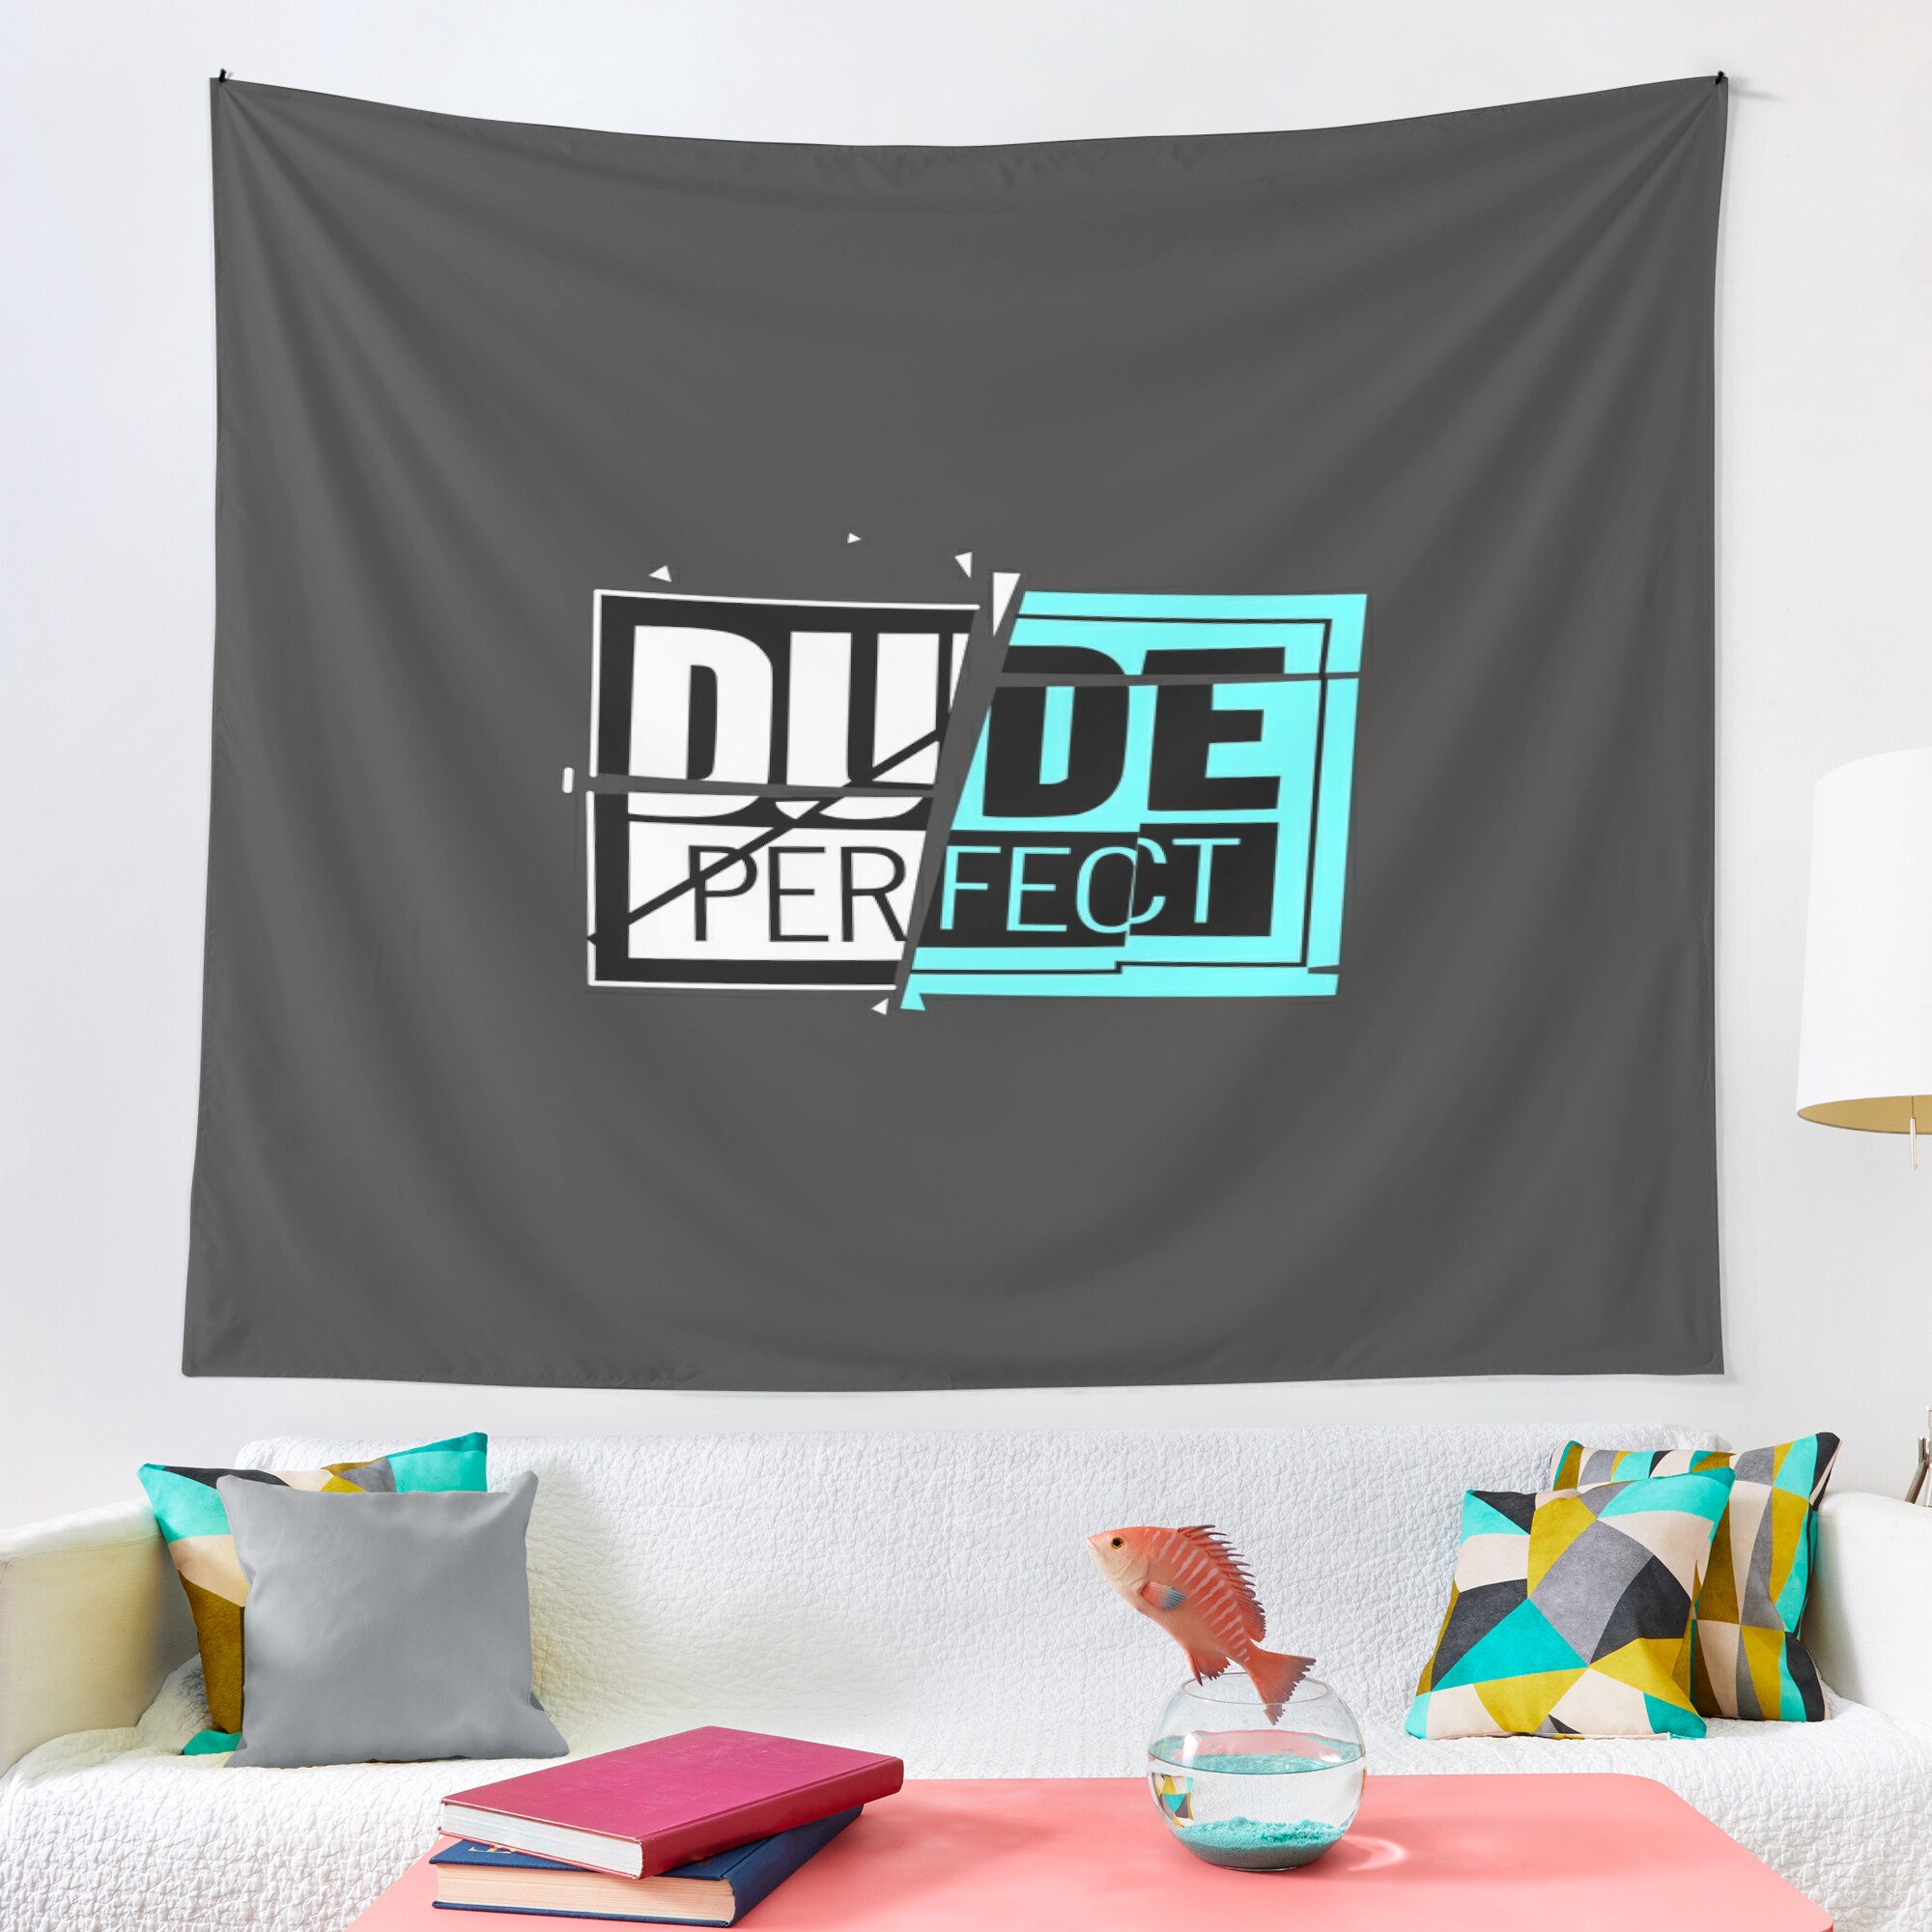 urtapestry lifestyle largesquare2000x2000 2 - Dude Perfect Merch